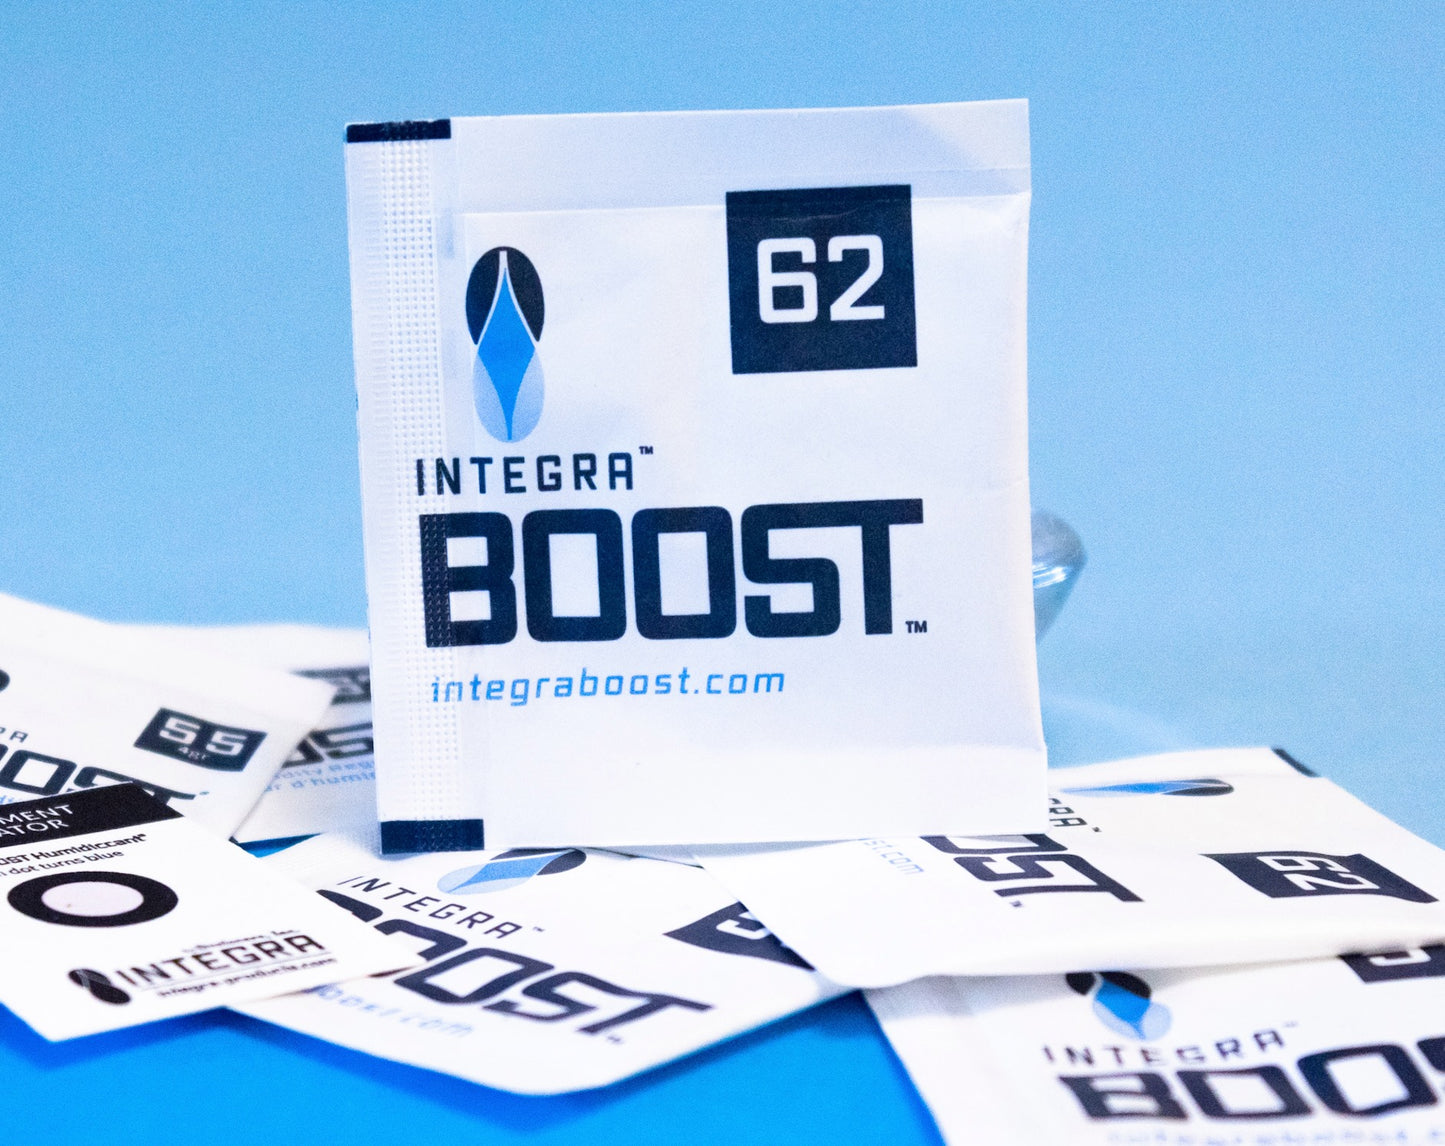 Integra Boost® 1 Gram 62% rH Humidity Control Packets are salt-free, spill-proof and FDA-complaint so you can safely and confidently place Integra BOOST® packs directly inside a container or jar to absorb and/or provide excess moisture as needed